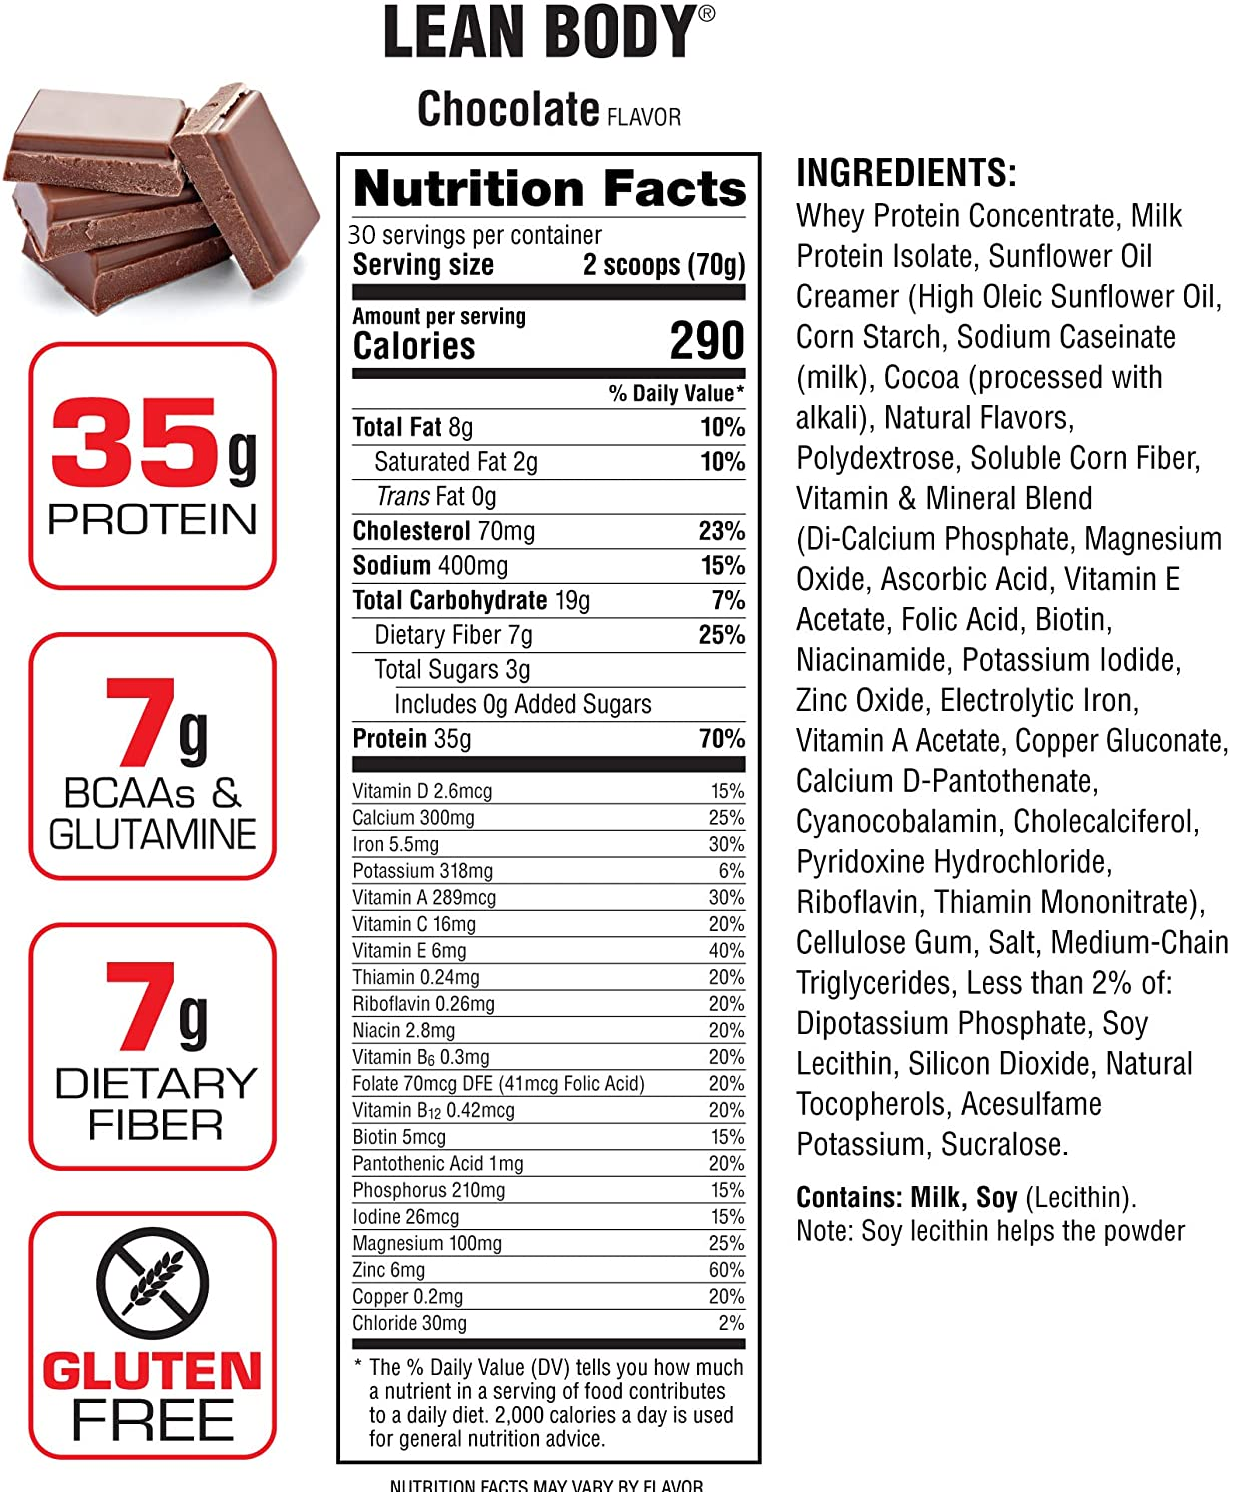 Lean Body healthy chocolate-flavored drink, with 35g protein, 7g fiber, and various vitamins and minerals, 30 servings per container.